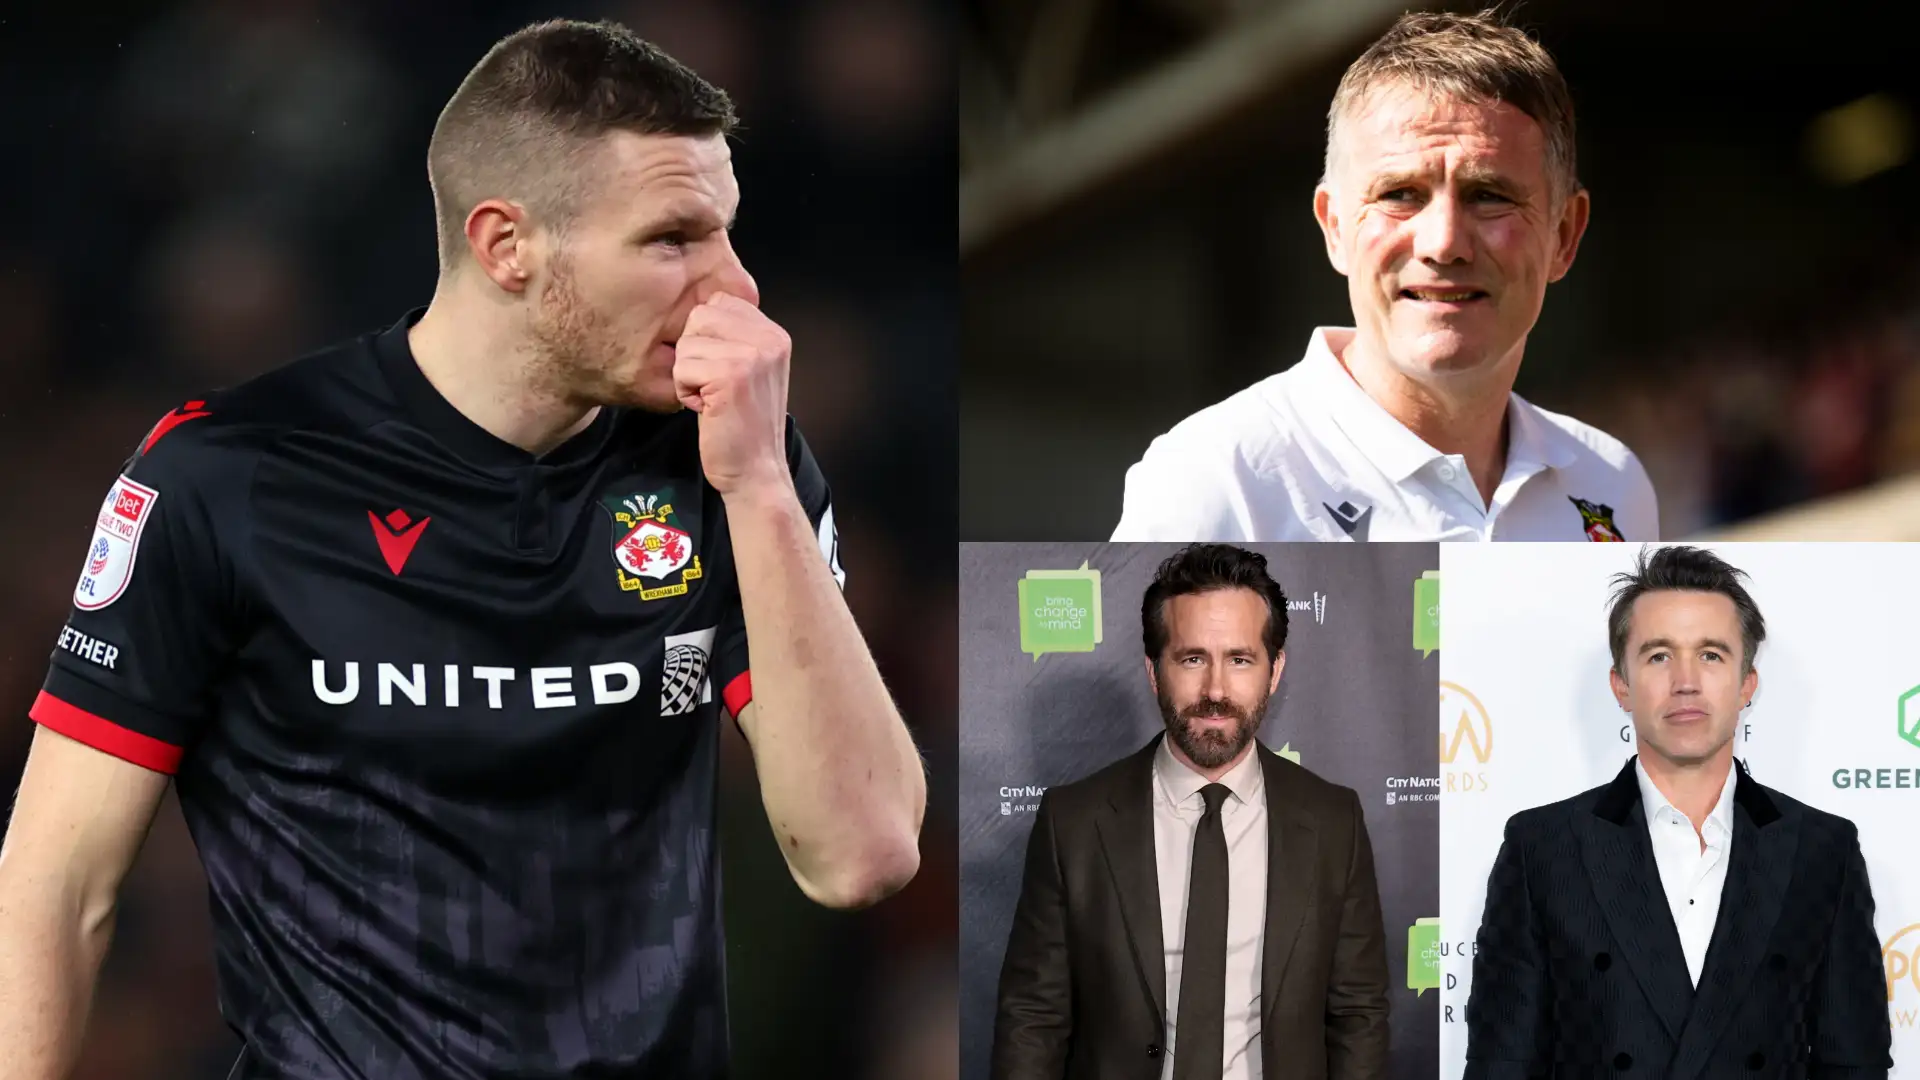 Will Paul Mullin be Wrexham's next captain? Phil Parkinson speaks out on skipper dilemma after Luke Young & Ben Tozer exits as League one preparations begin for Ryan Reynolds & Rob McElhenney's side